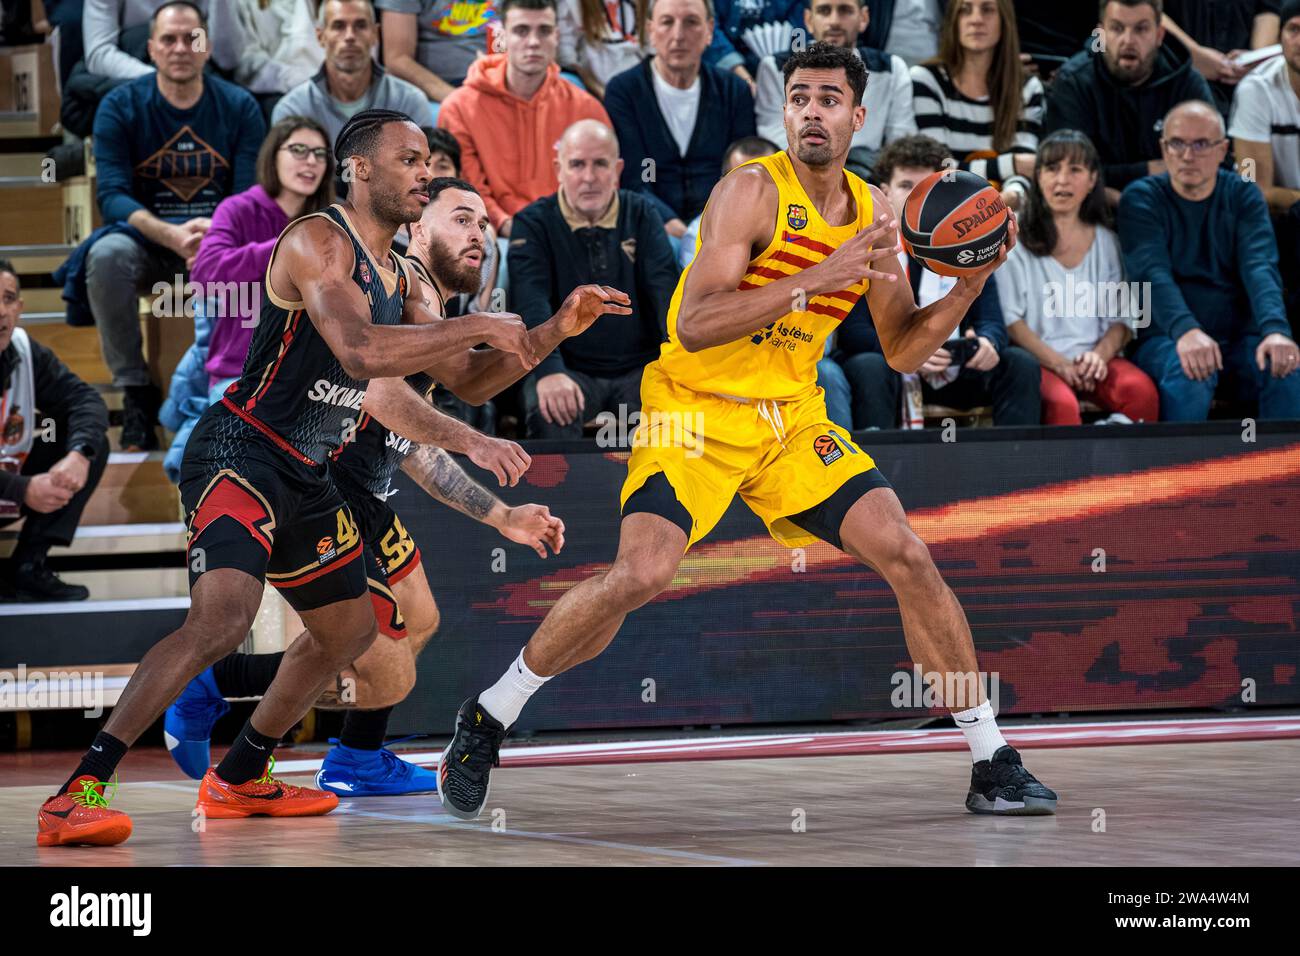 Monaco, Monaco. 29th Dec, 2023. Monaco player #55 Mike James, #4 Jaron Blossomgame and Barcelona player #1 Oscar da Silva are seen in action during the match for the 17th round of the Turkish Airlines Euroleague between AS Monaco and FC Barcelona at the Salle Gaston-Medecin in Monaco, on December 29, 2023. Photo by Laurent Coust/ABACAPRESS.COM Credit: Abaca Press/Alamy Live News Stock Photo